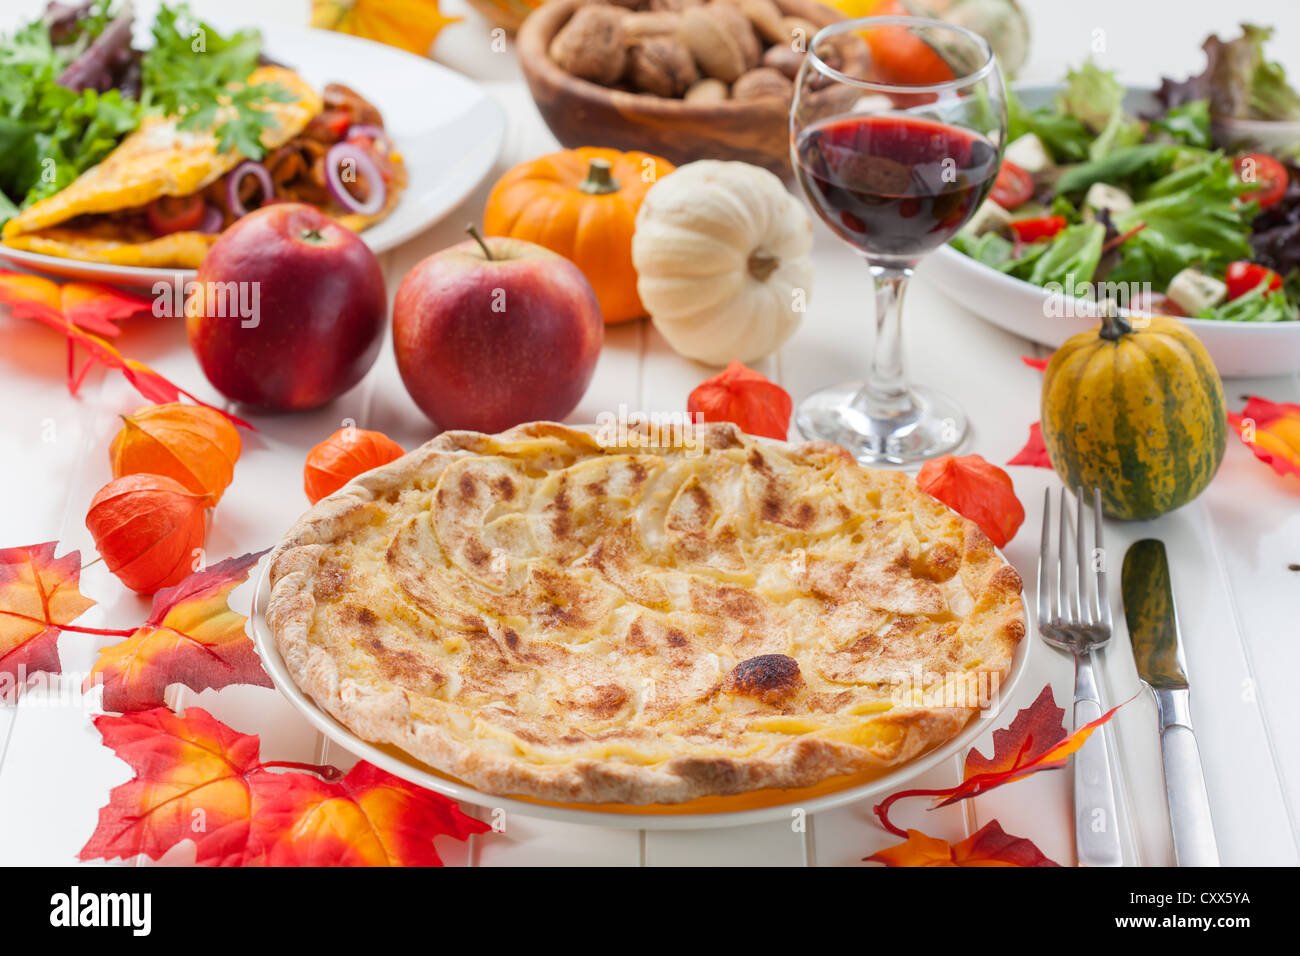 Apple pie or tart with red wine for Thanksgiving Stock Photo